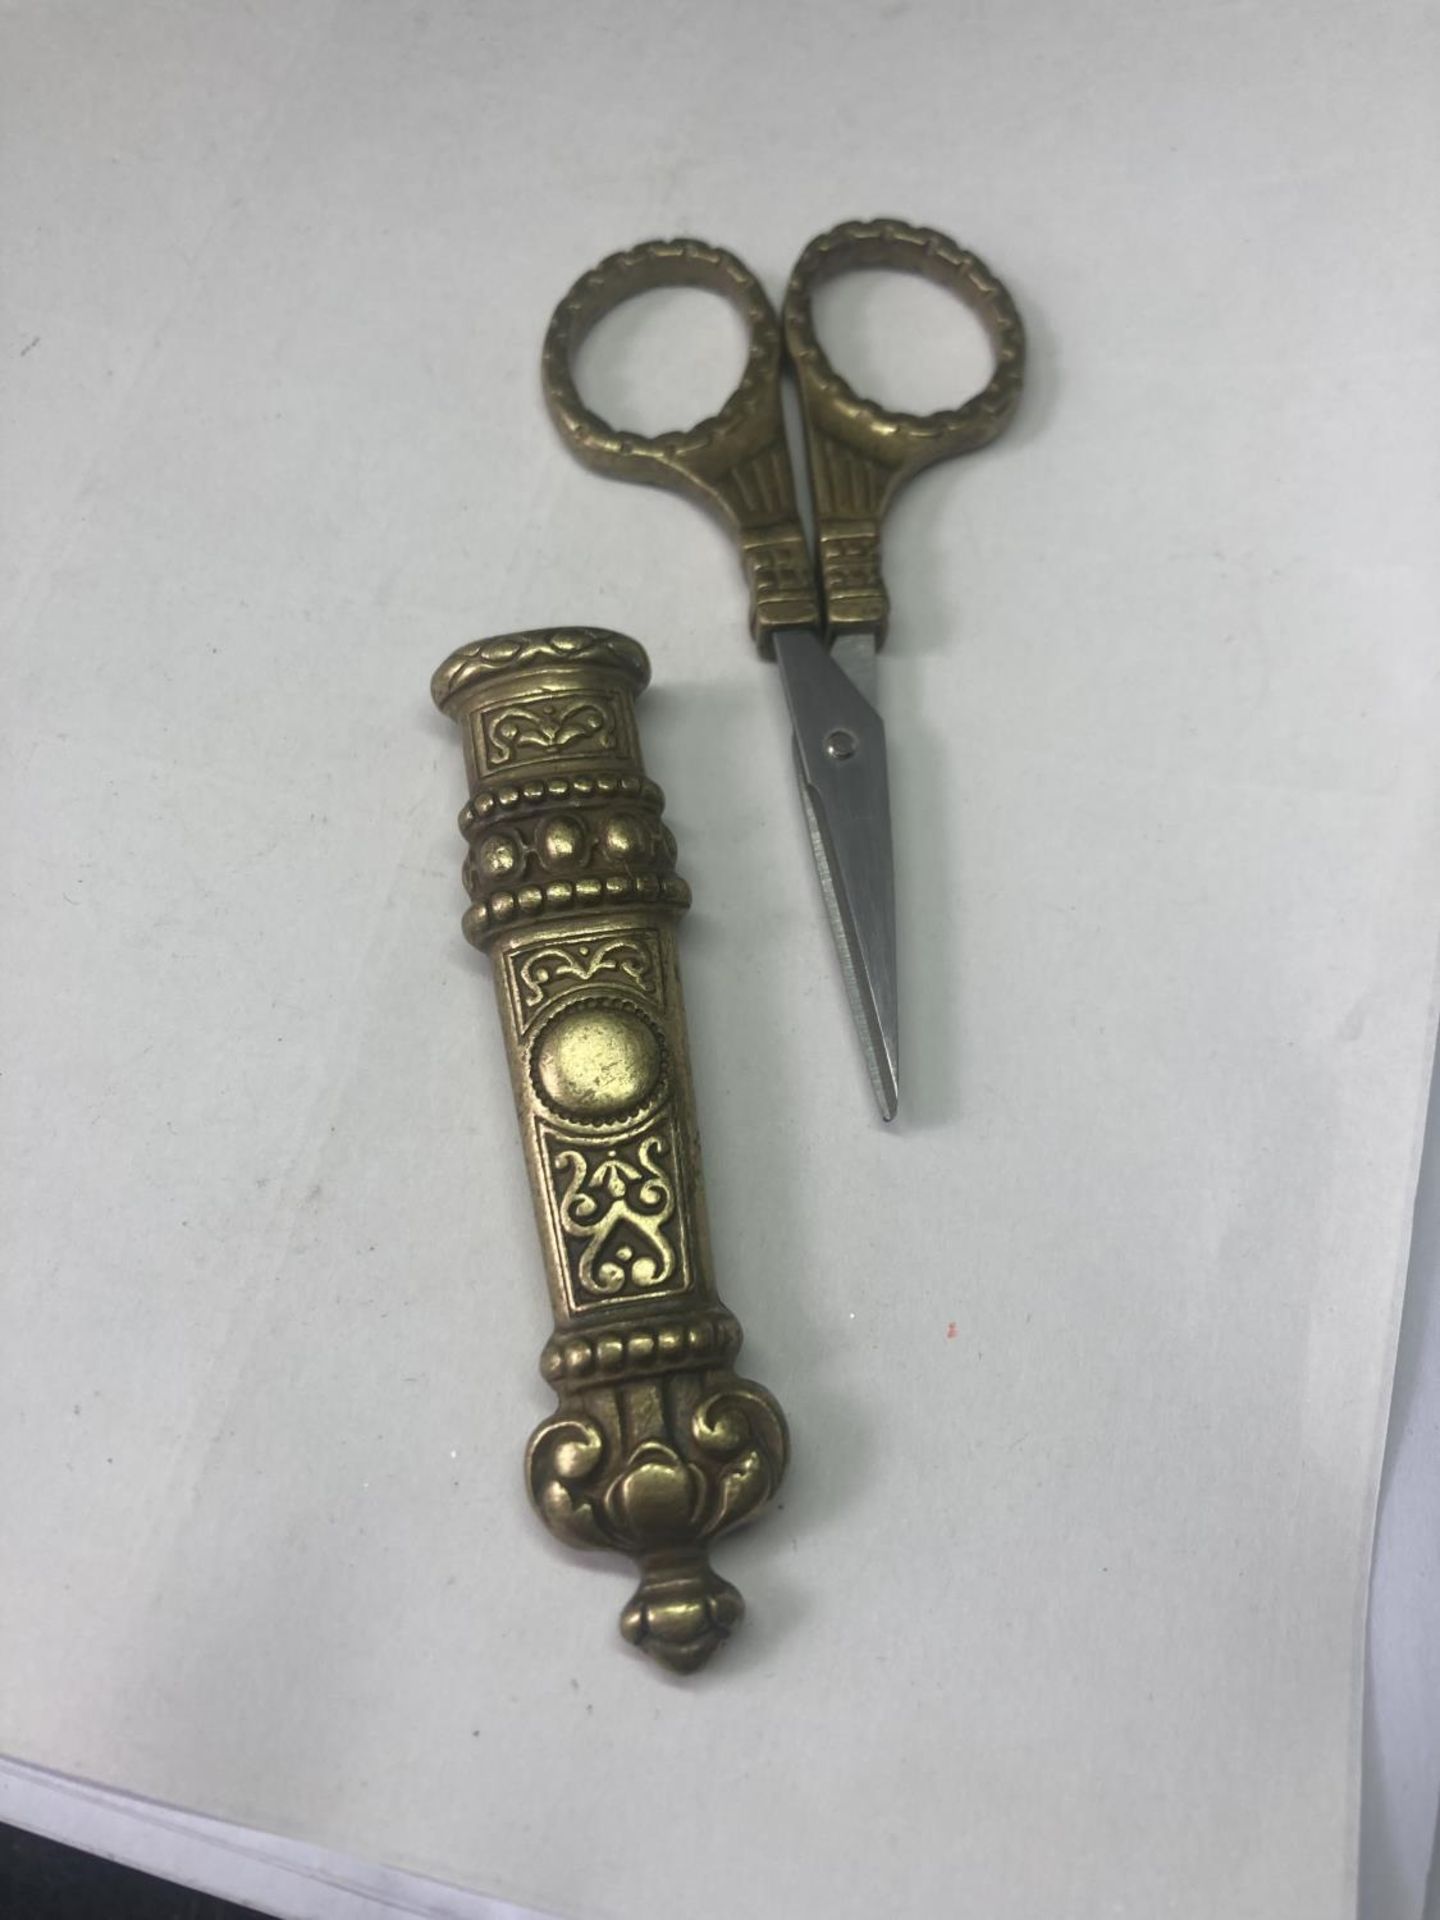 A PAIR OF DECORATIVE BRASS DRESS MAKING SCISSORS AND A NEEDLE CASE - Image 6 of 8